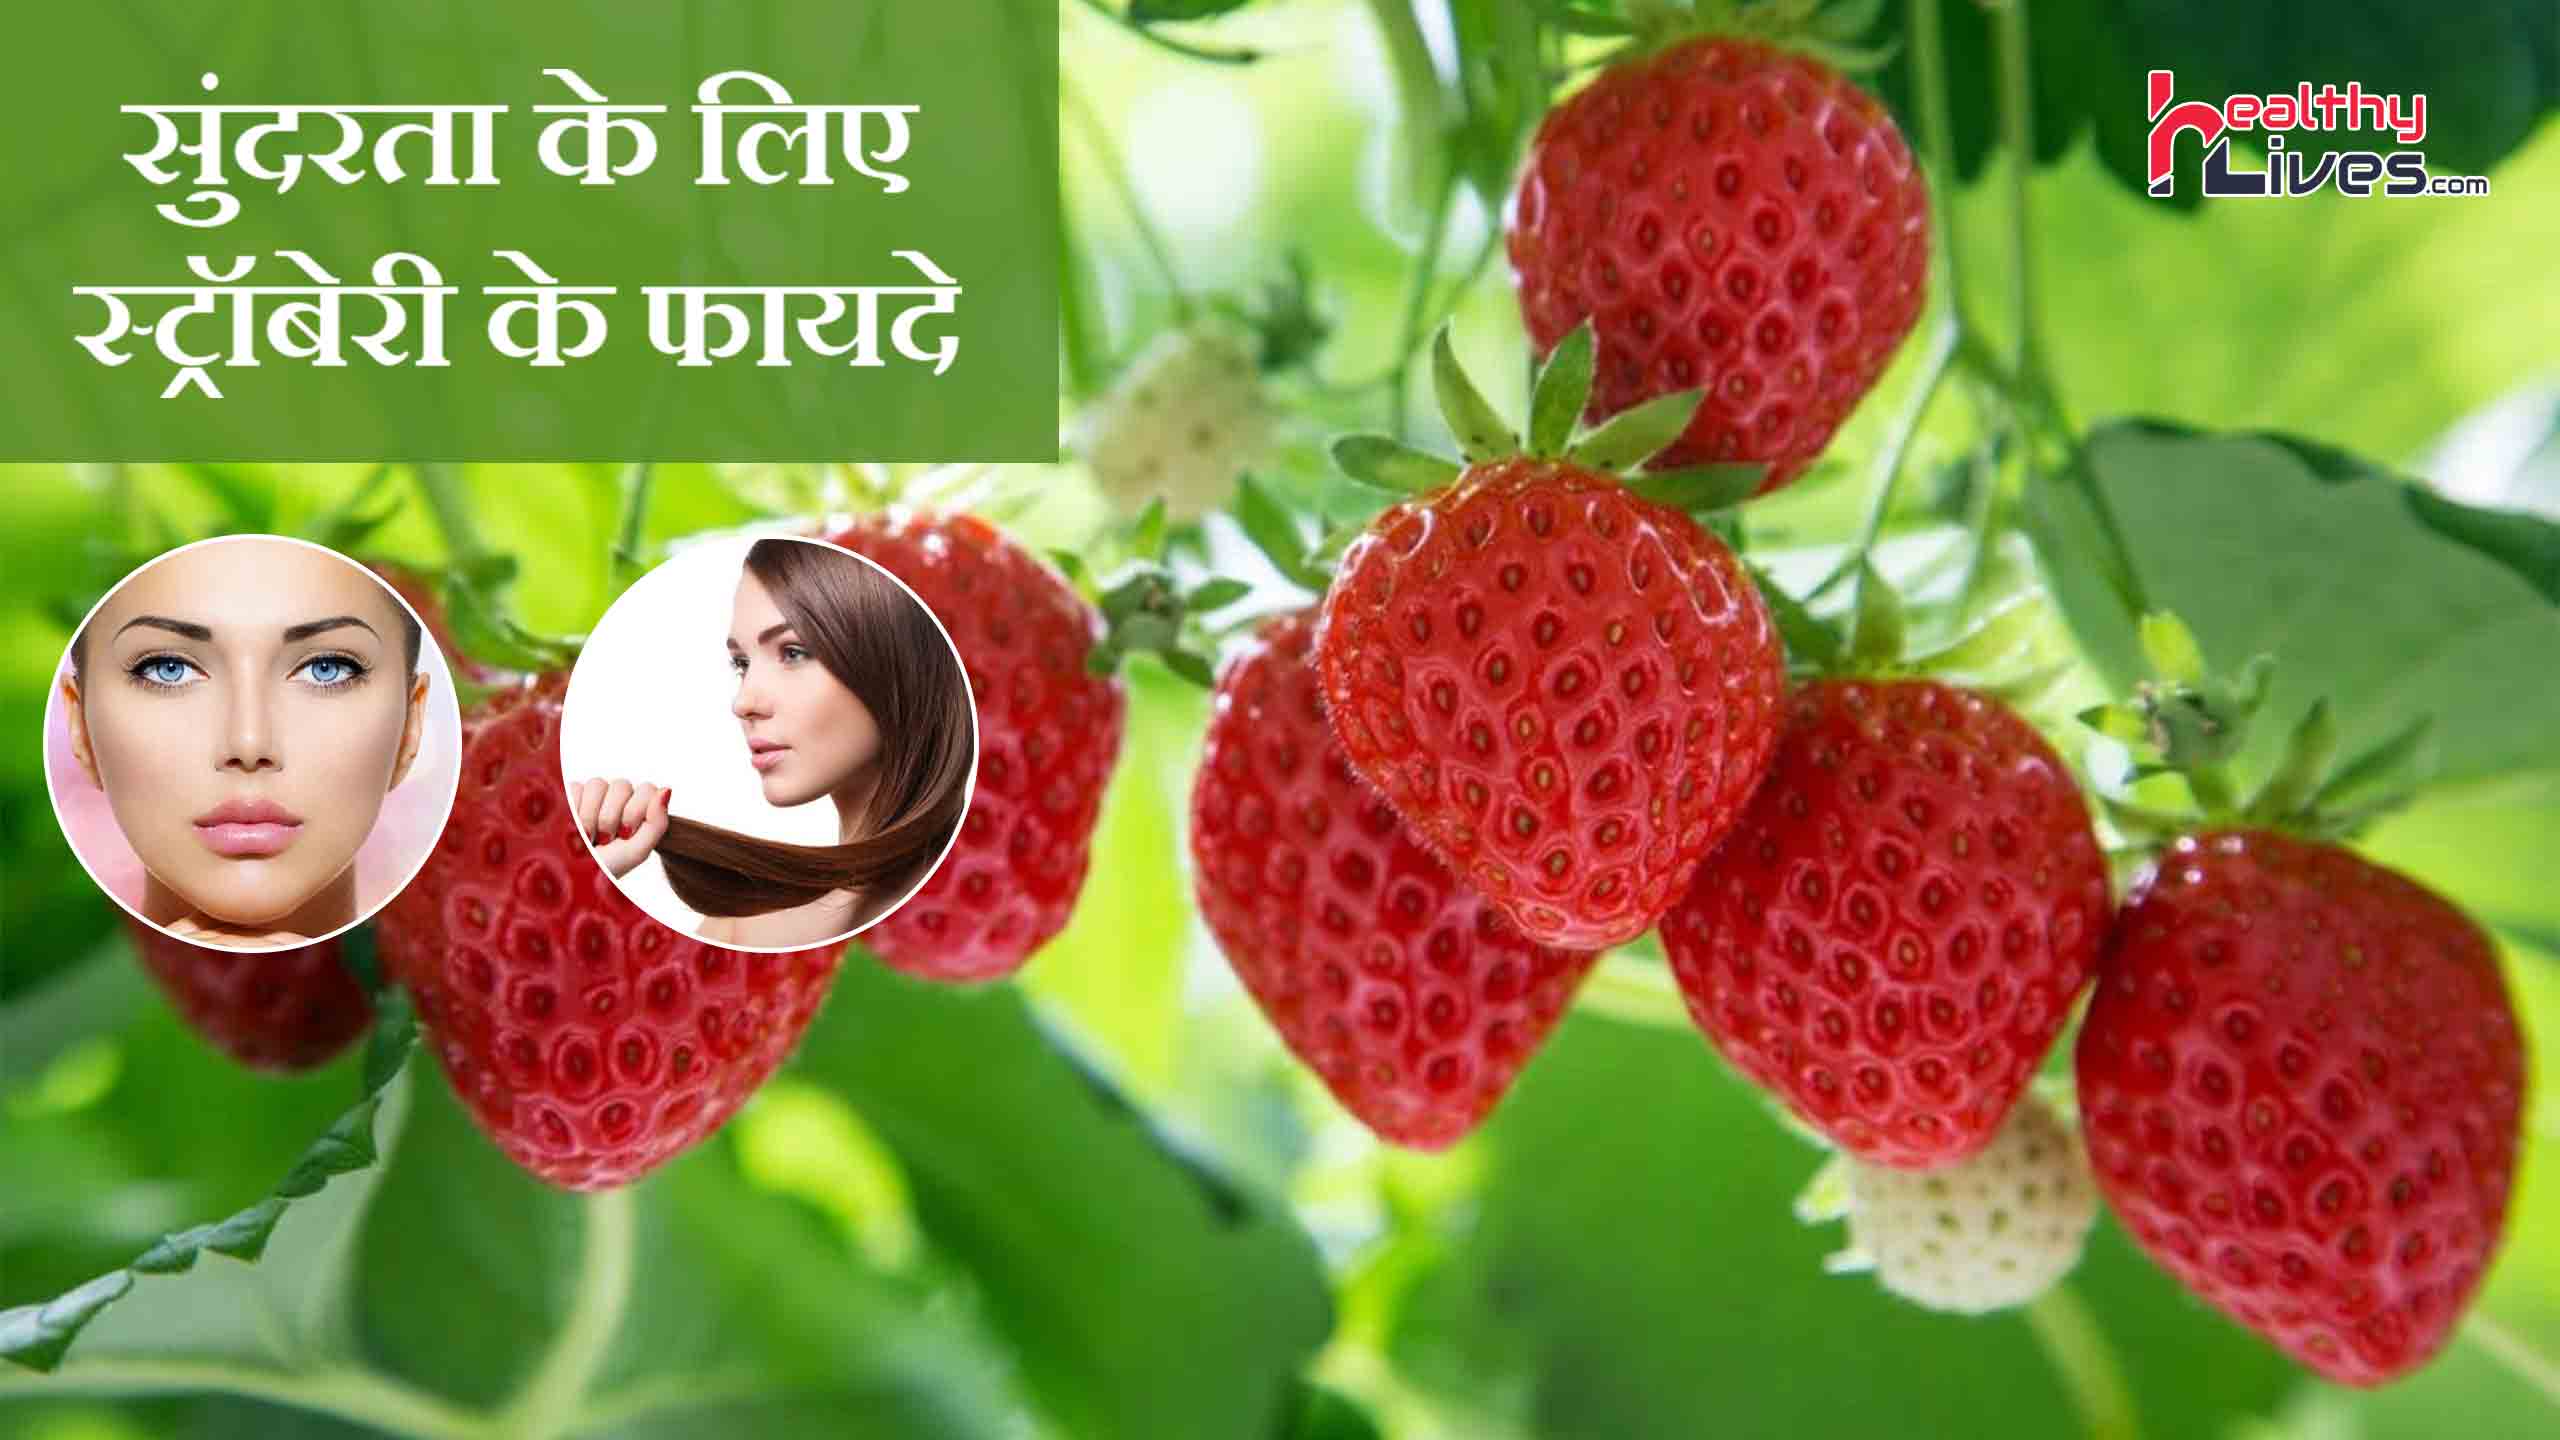 How to Make a Strawberry Hair Mask Using 4 Simple Ingredients